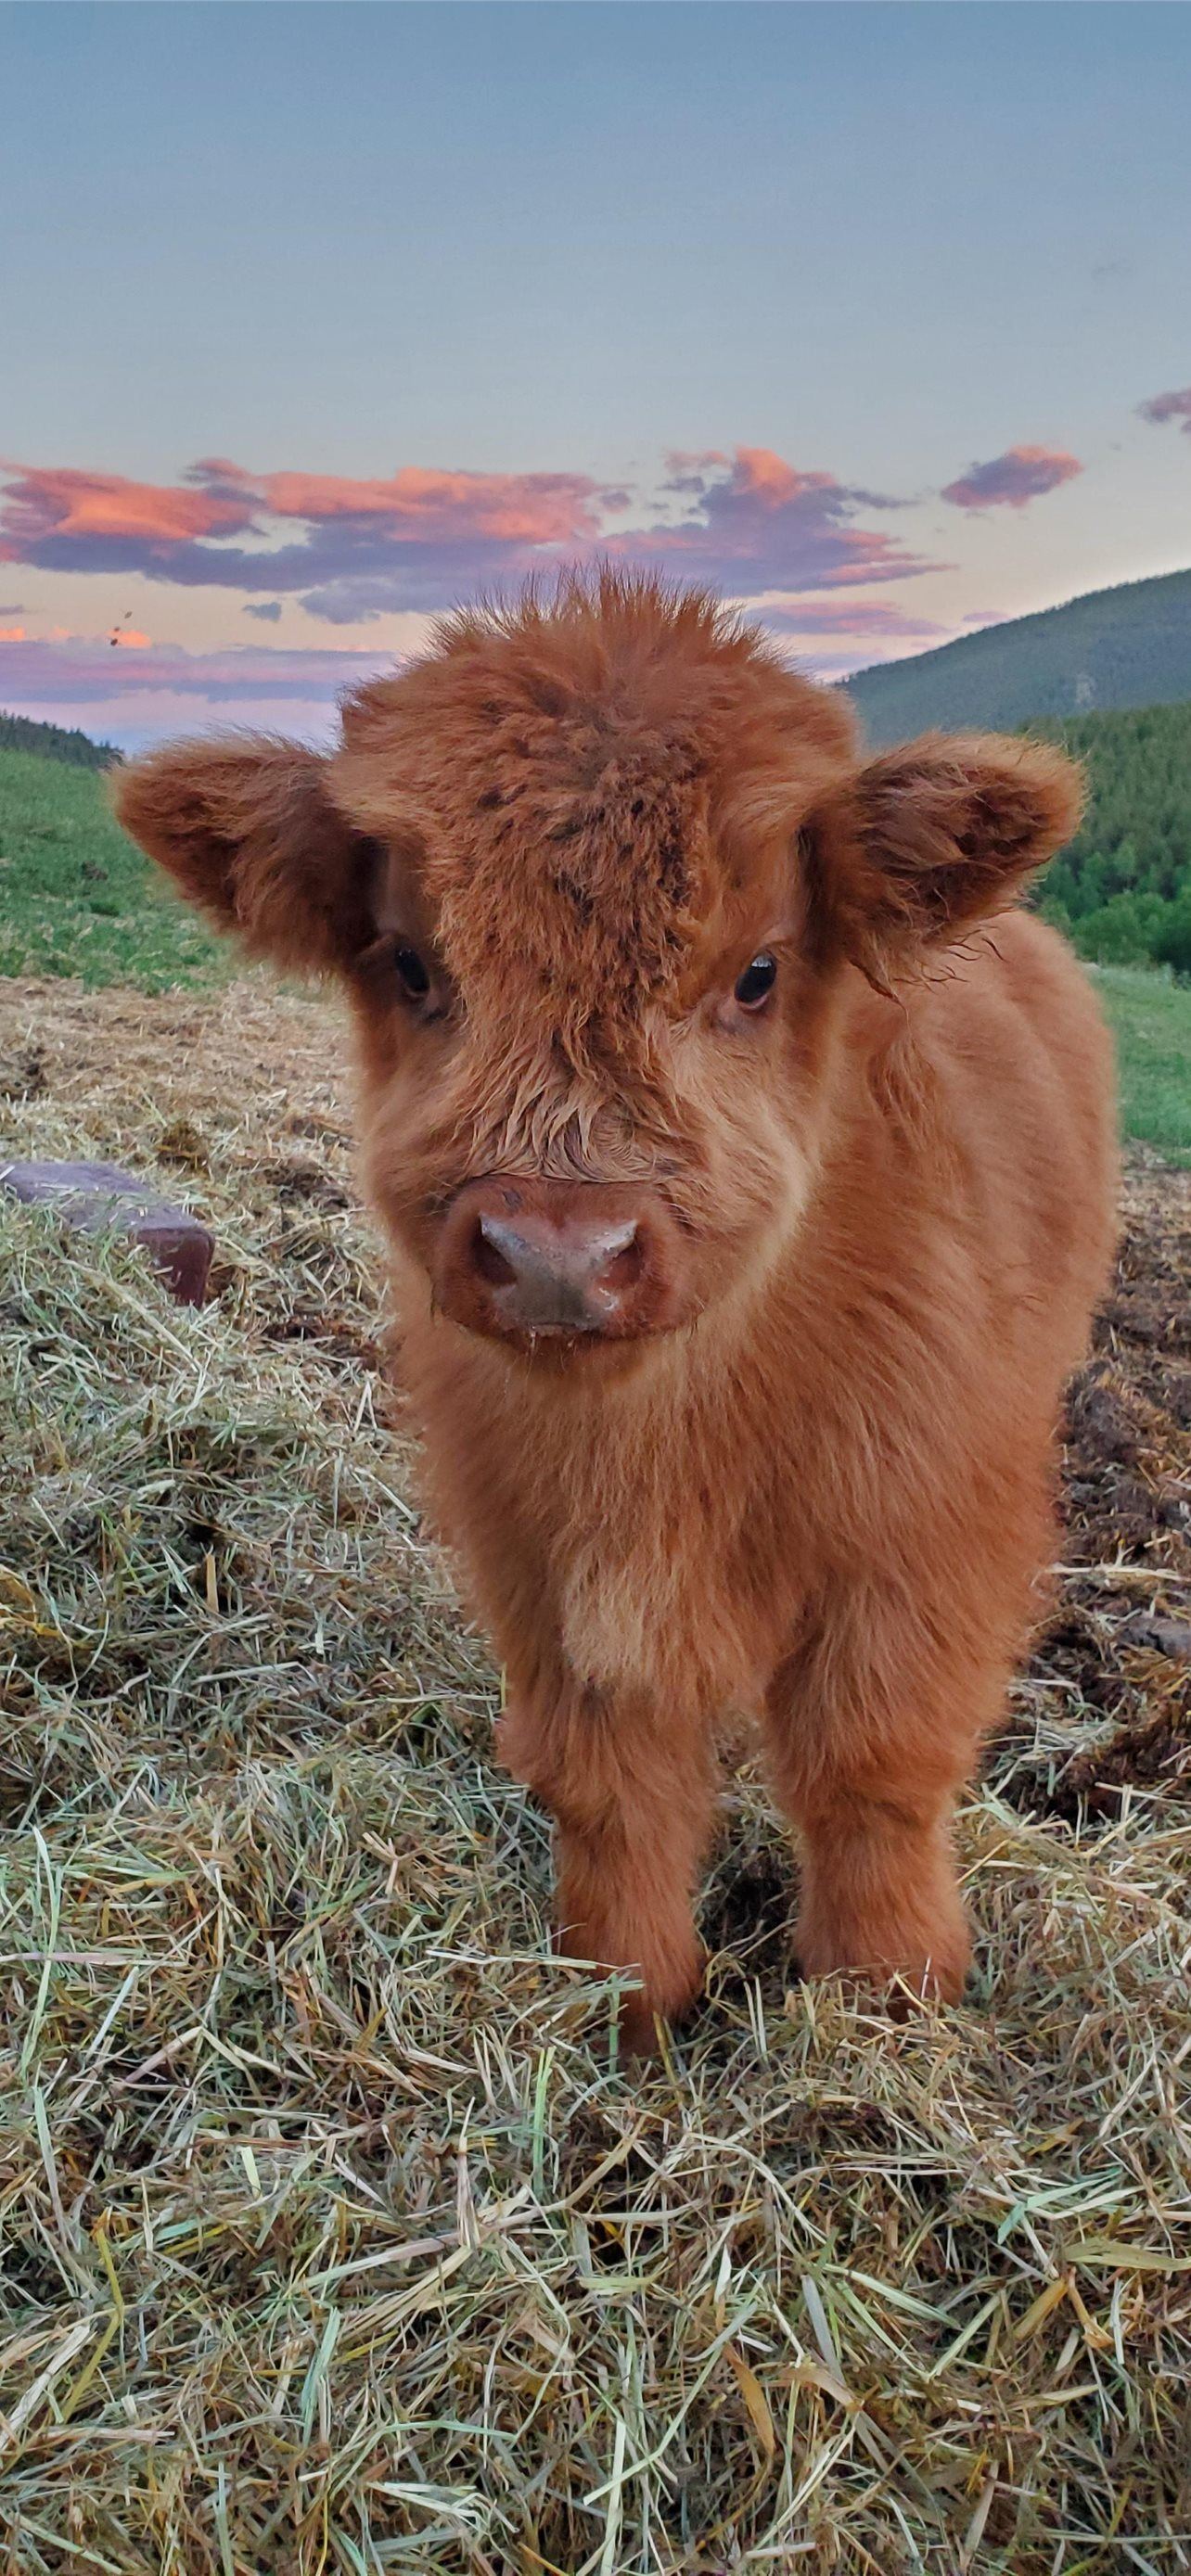 A small brown cow standing in the grass - Cow